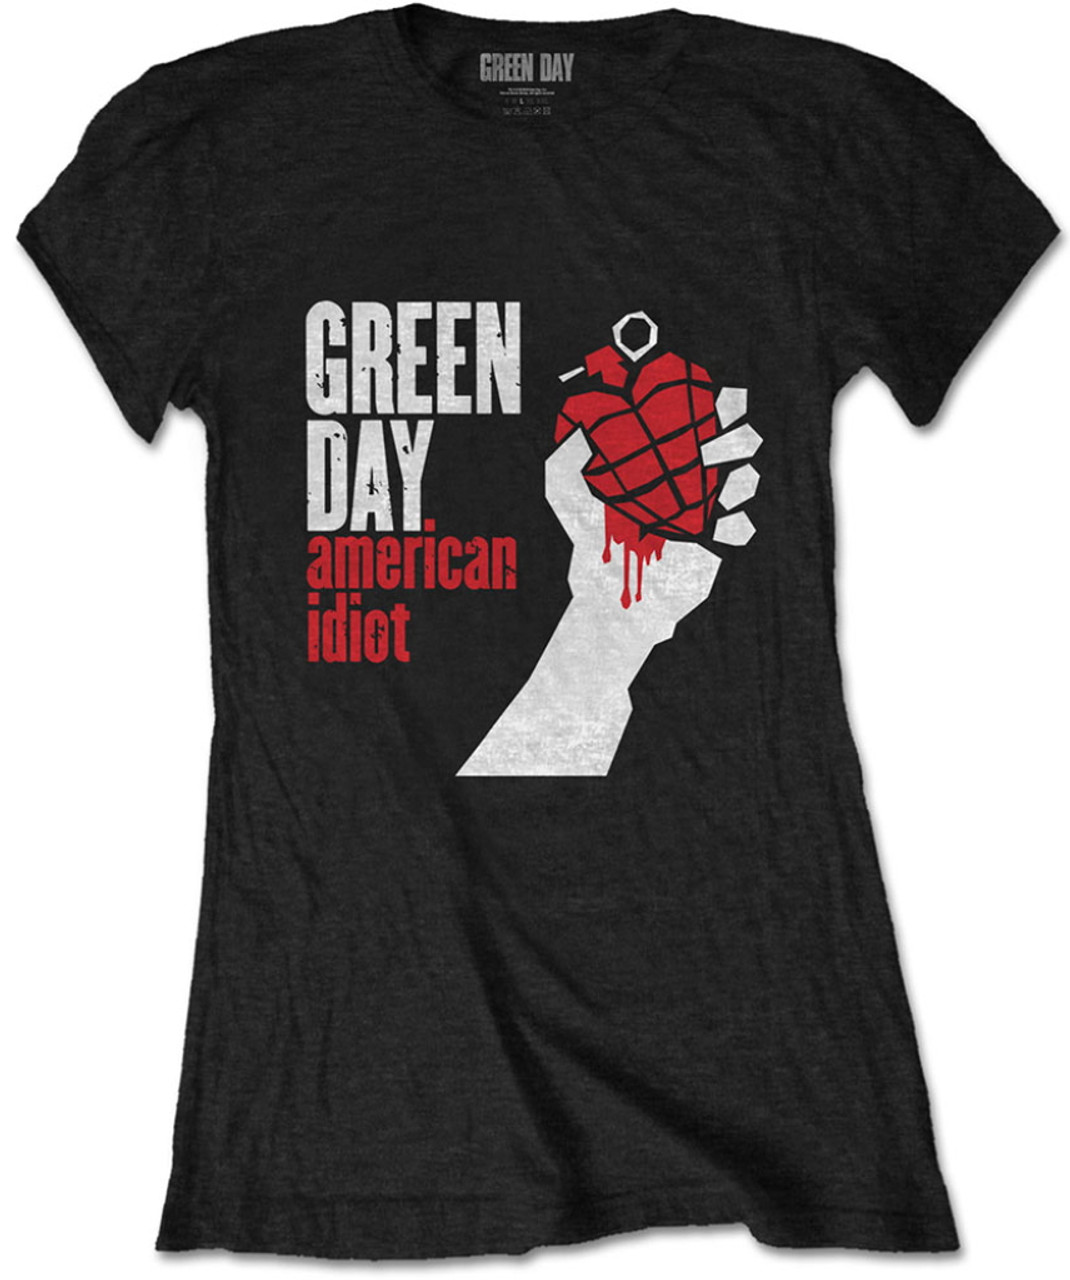 Green Day 'American Idiot' (Black) Womens Fitted T-Shirt